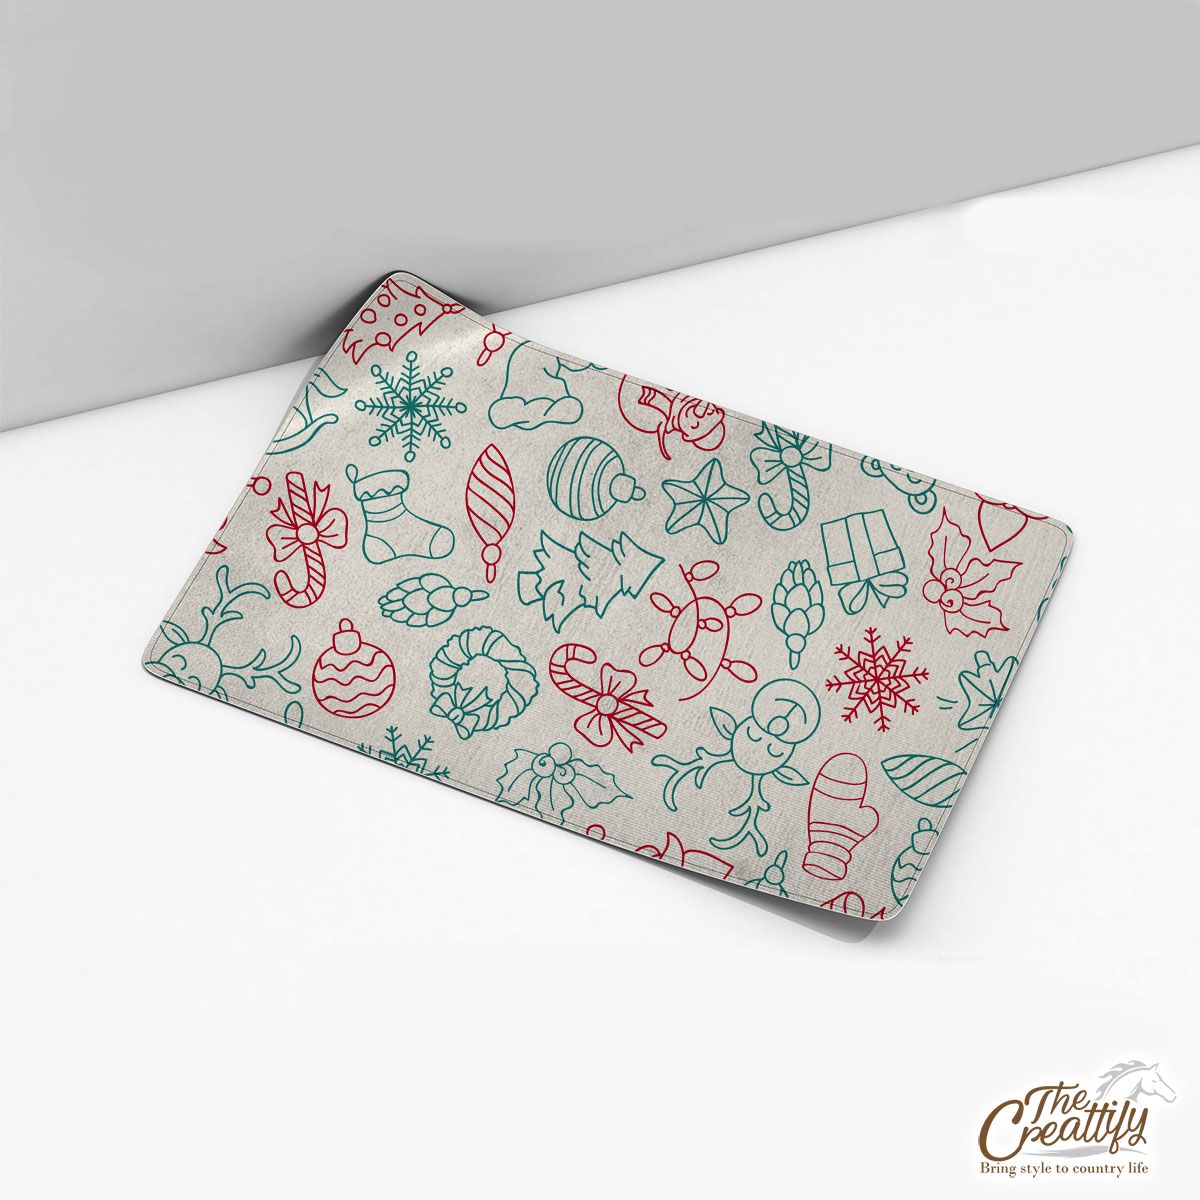 Snowflakes, Candy Cane, Baubles, Christmas Tree Pattern Desk Mat